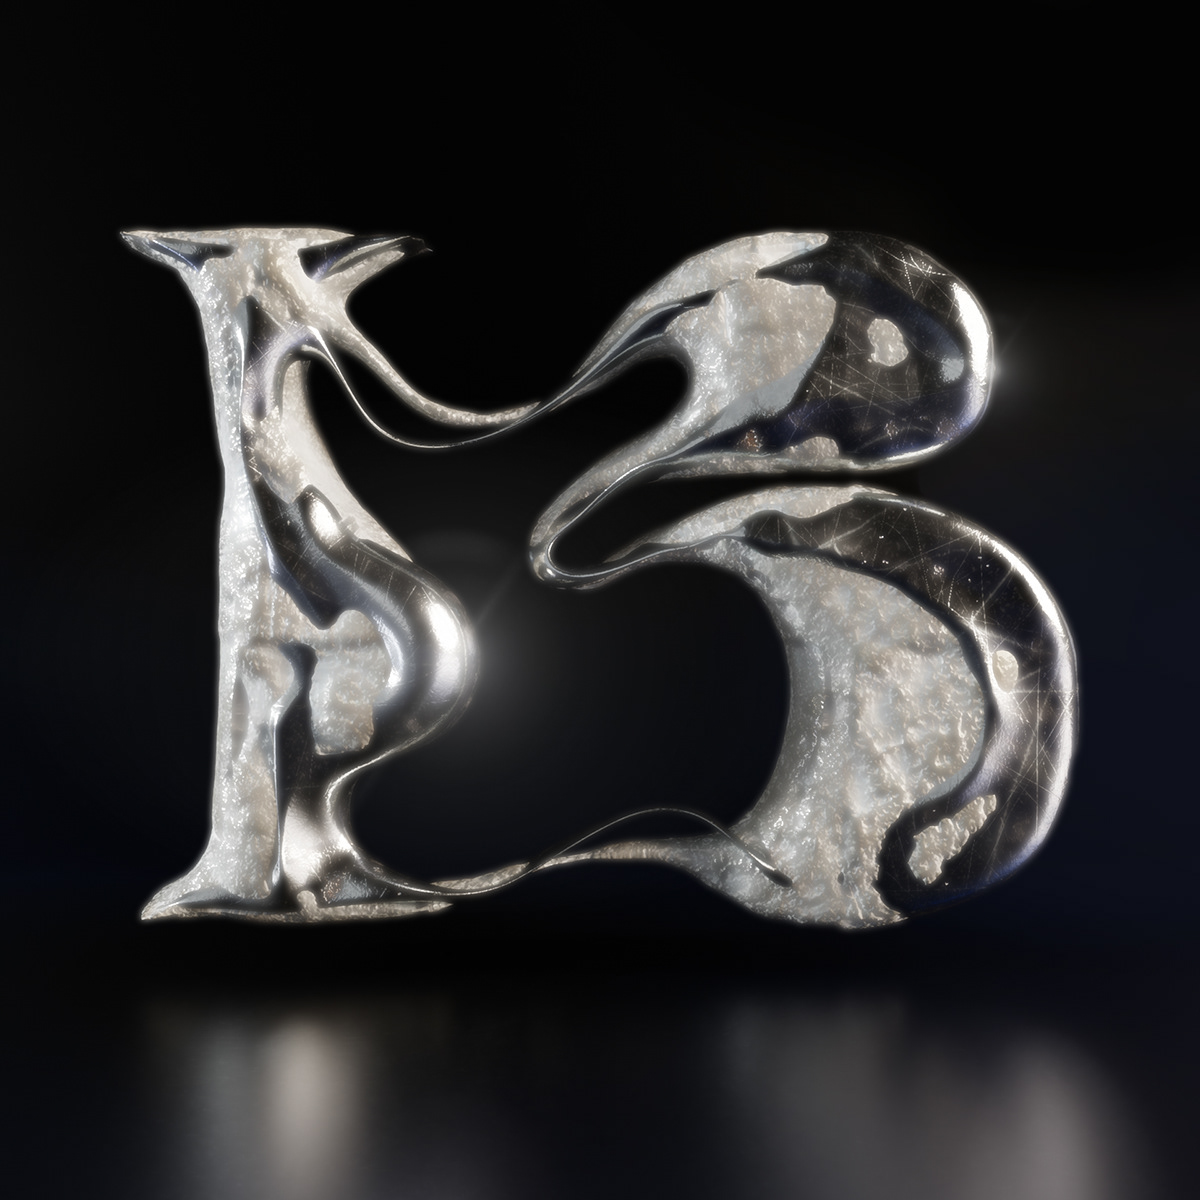 36daysoftype 3D 3d letters Chrome Type graphic design  lettering typography   cryptoart digitalart nft